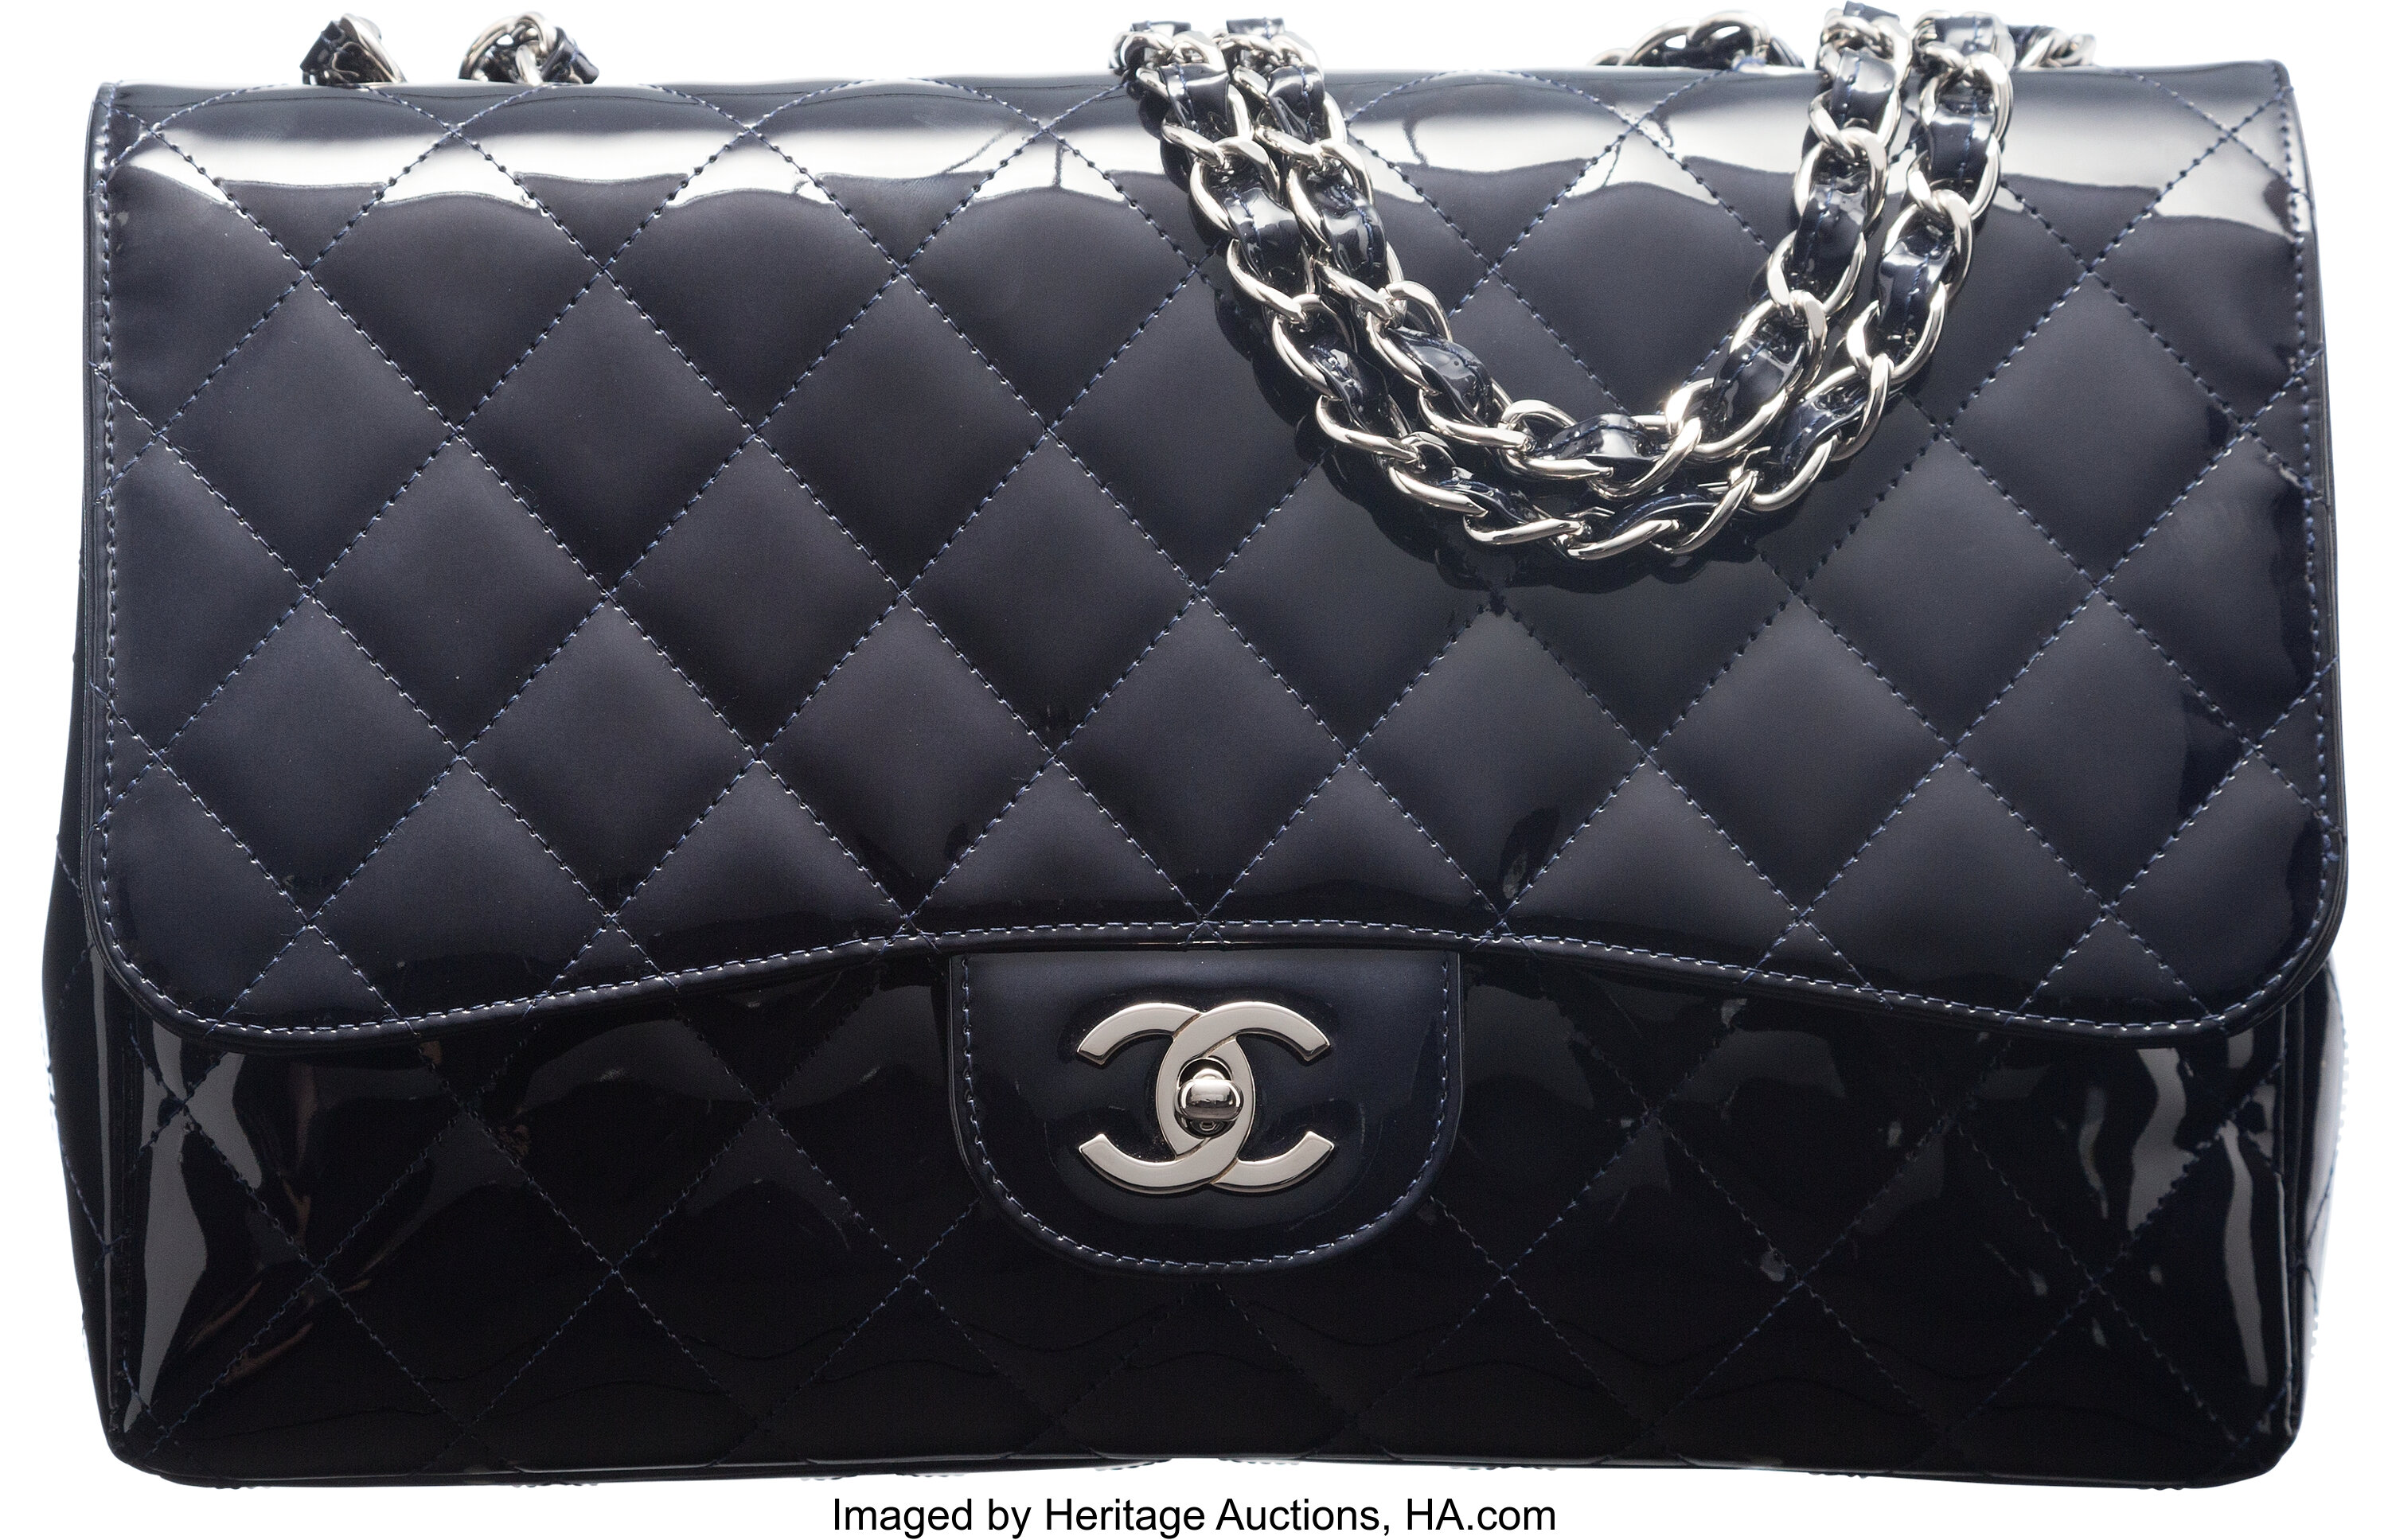 The Most Expensive Chanel Bag Ever Sold at Auction: Karl